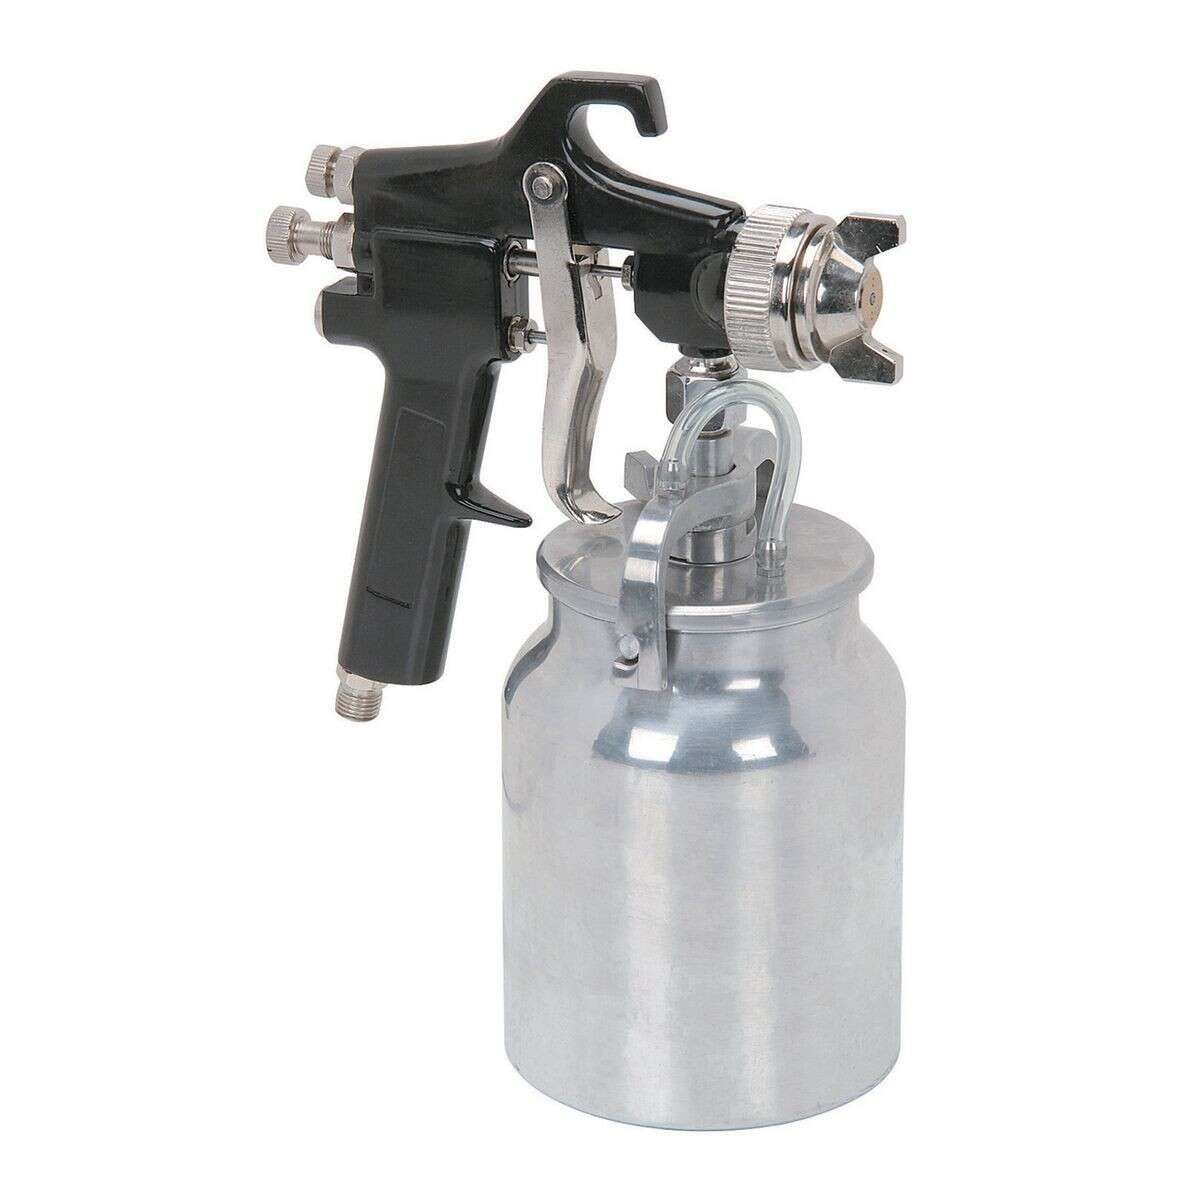 HOW TO USE A PAINT SPRAY GUN. Are you tired of using a brush and… | by Ian  johnson | Medium